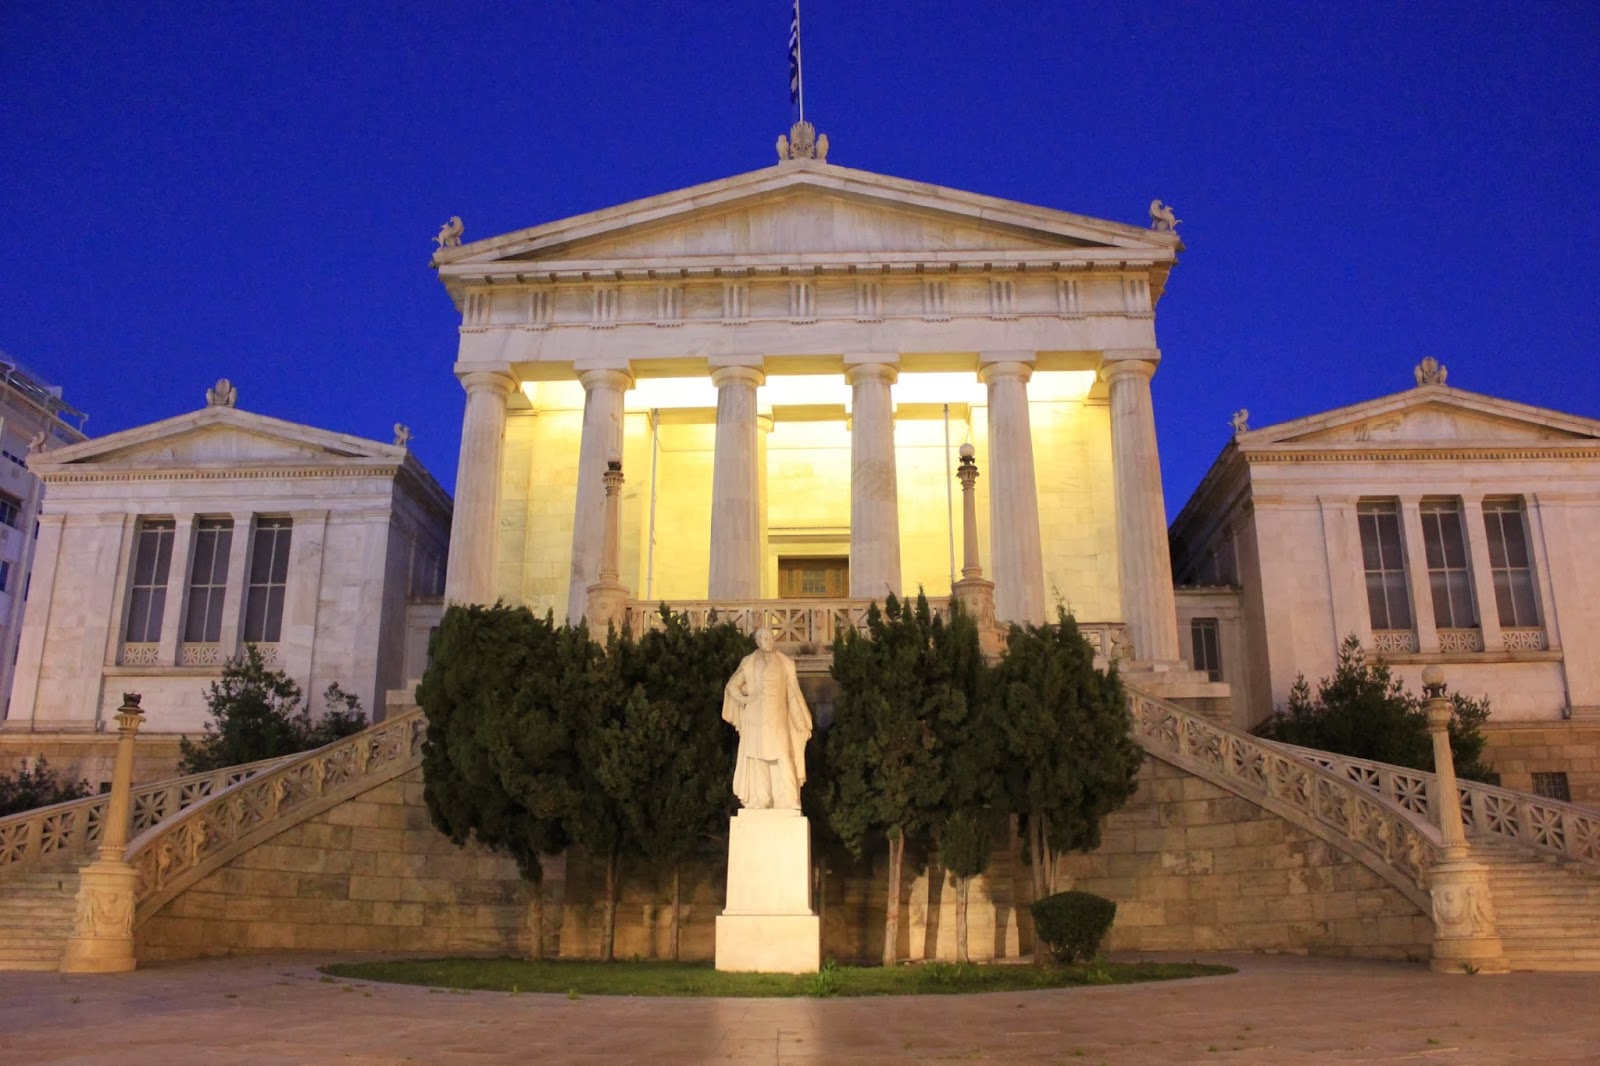 https://www.yizuo-media.com/albums/albums/userpics/10003/National_Library_of_Greece.jpg